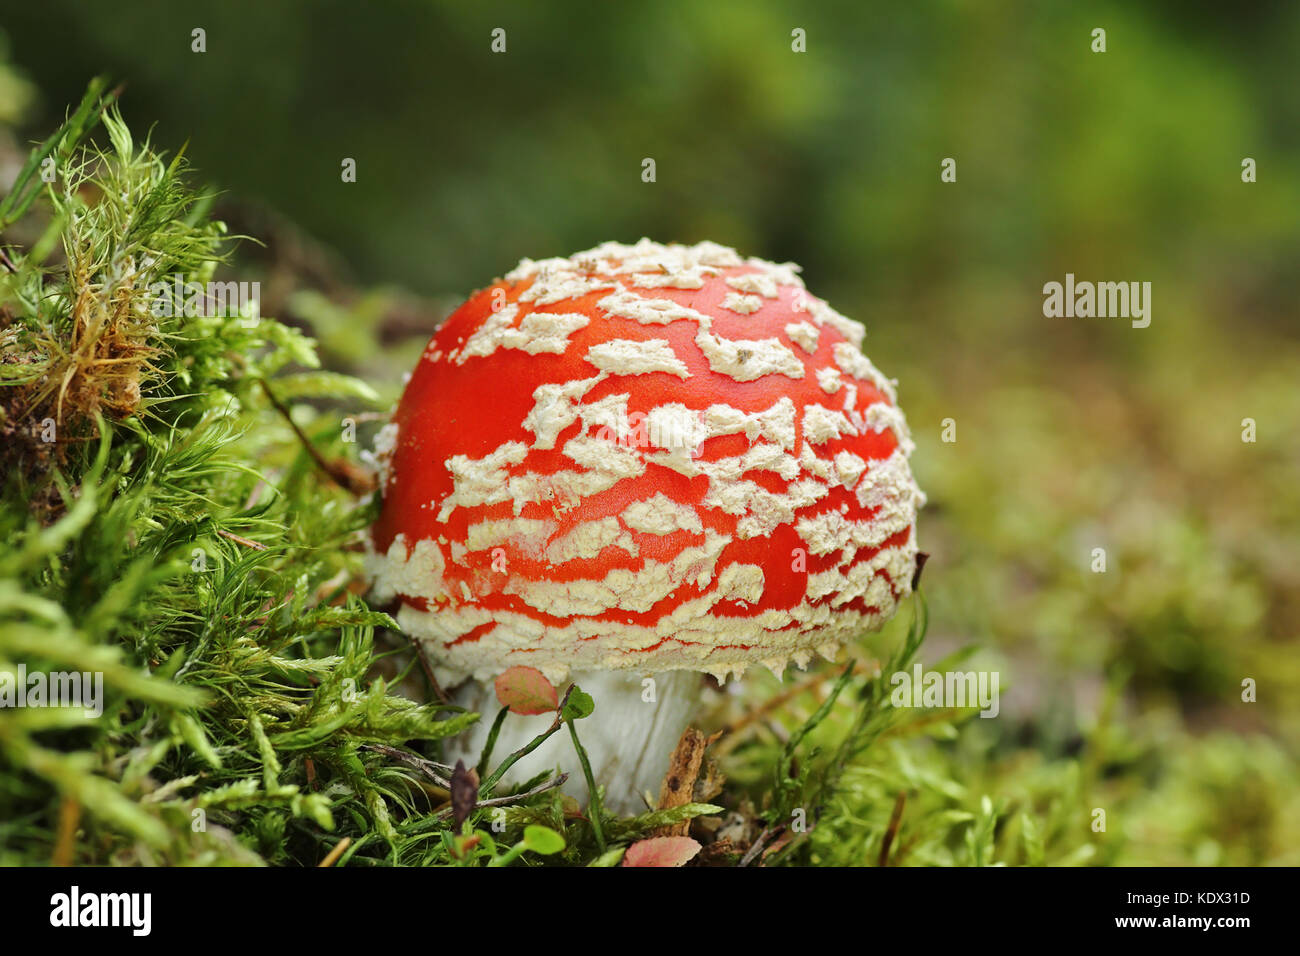 colorful fly agaric, toxic mushroom growing on moss ( Amanita muscaria ) Stock Photo